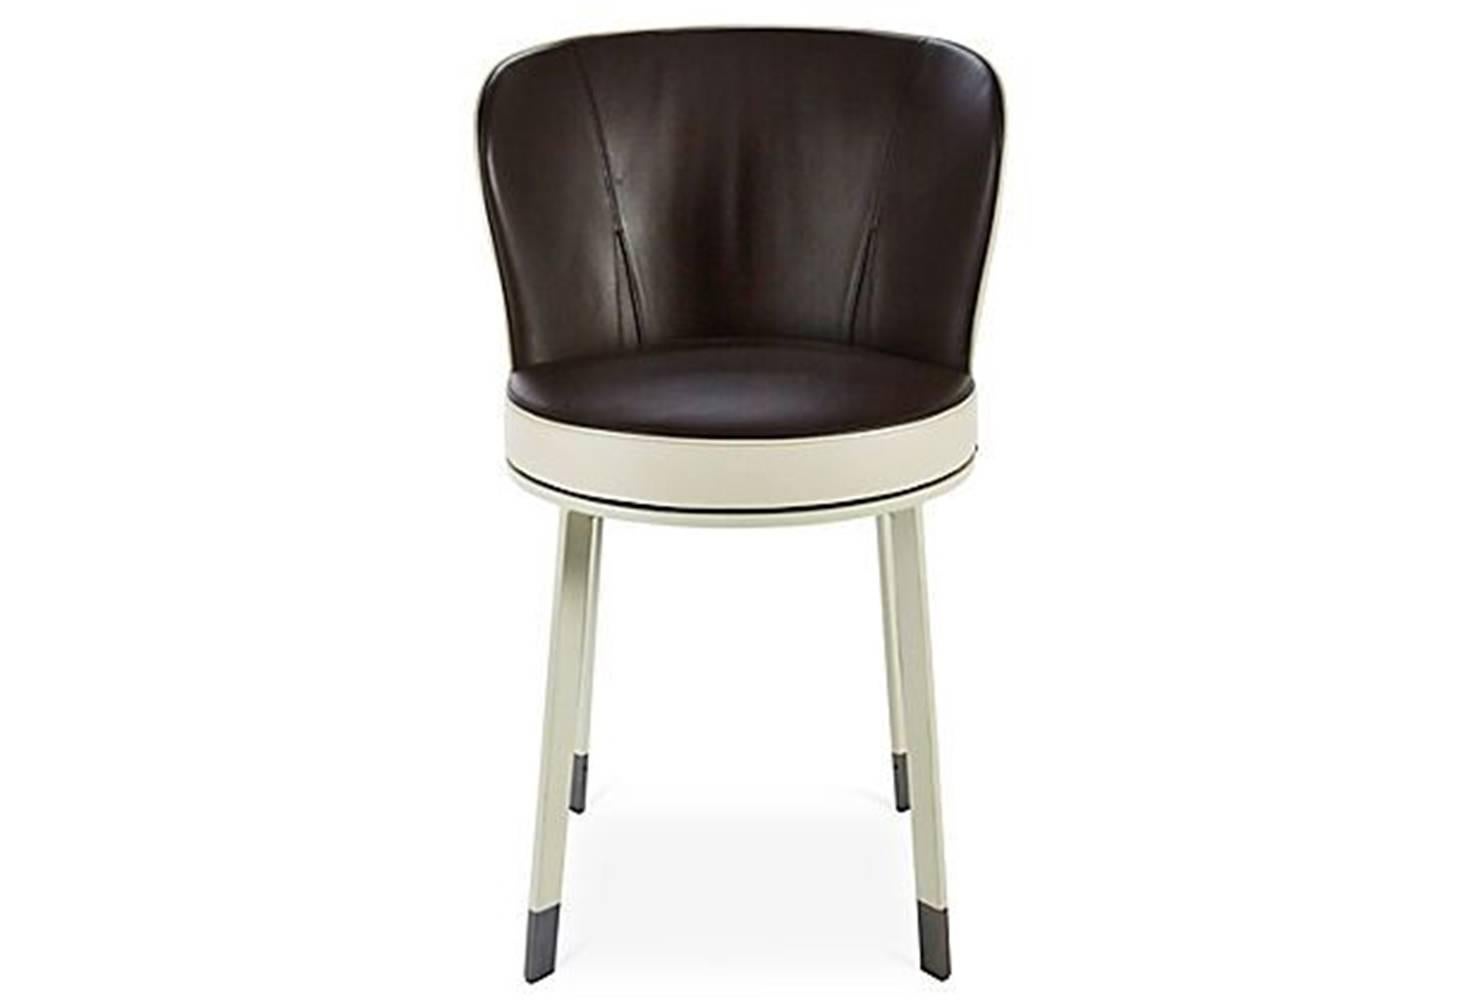 Giorgetti Ode swivel dining chair in leather.